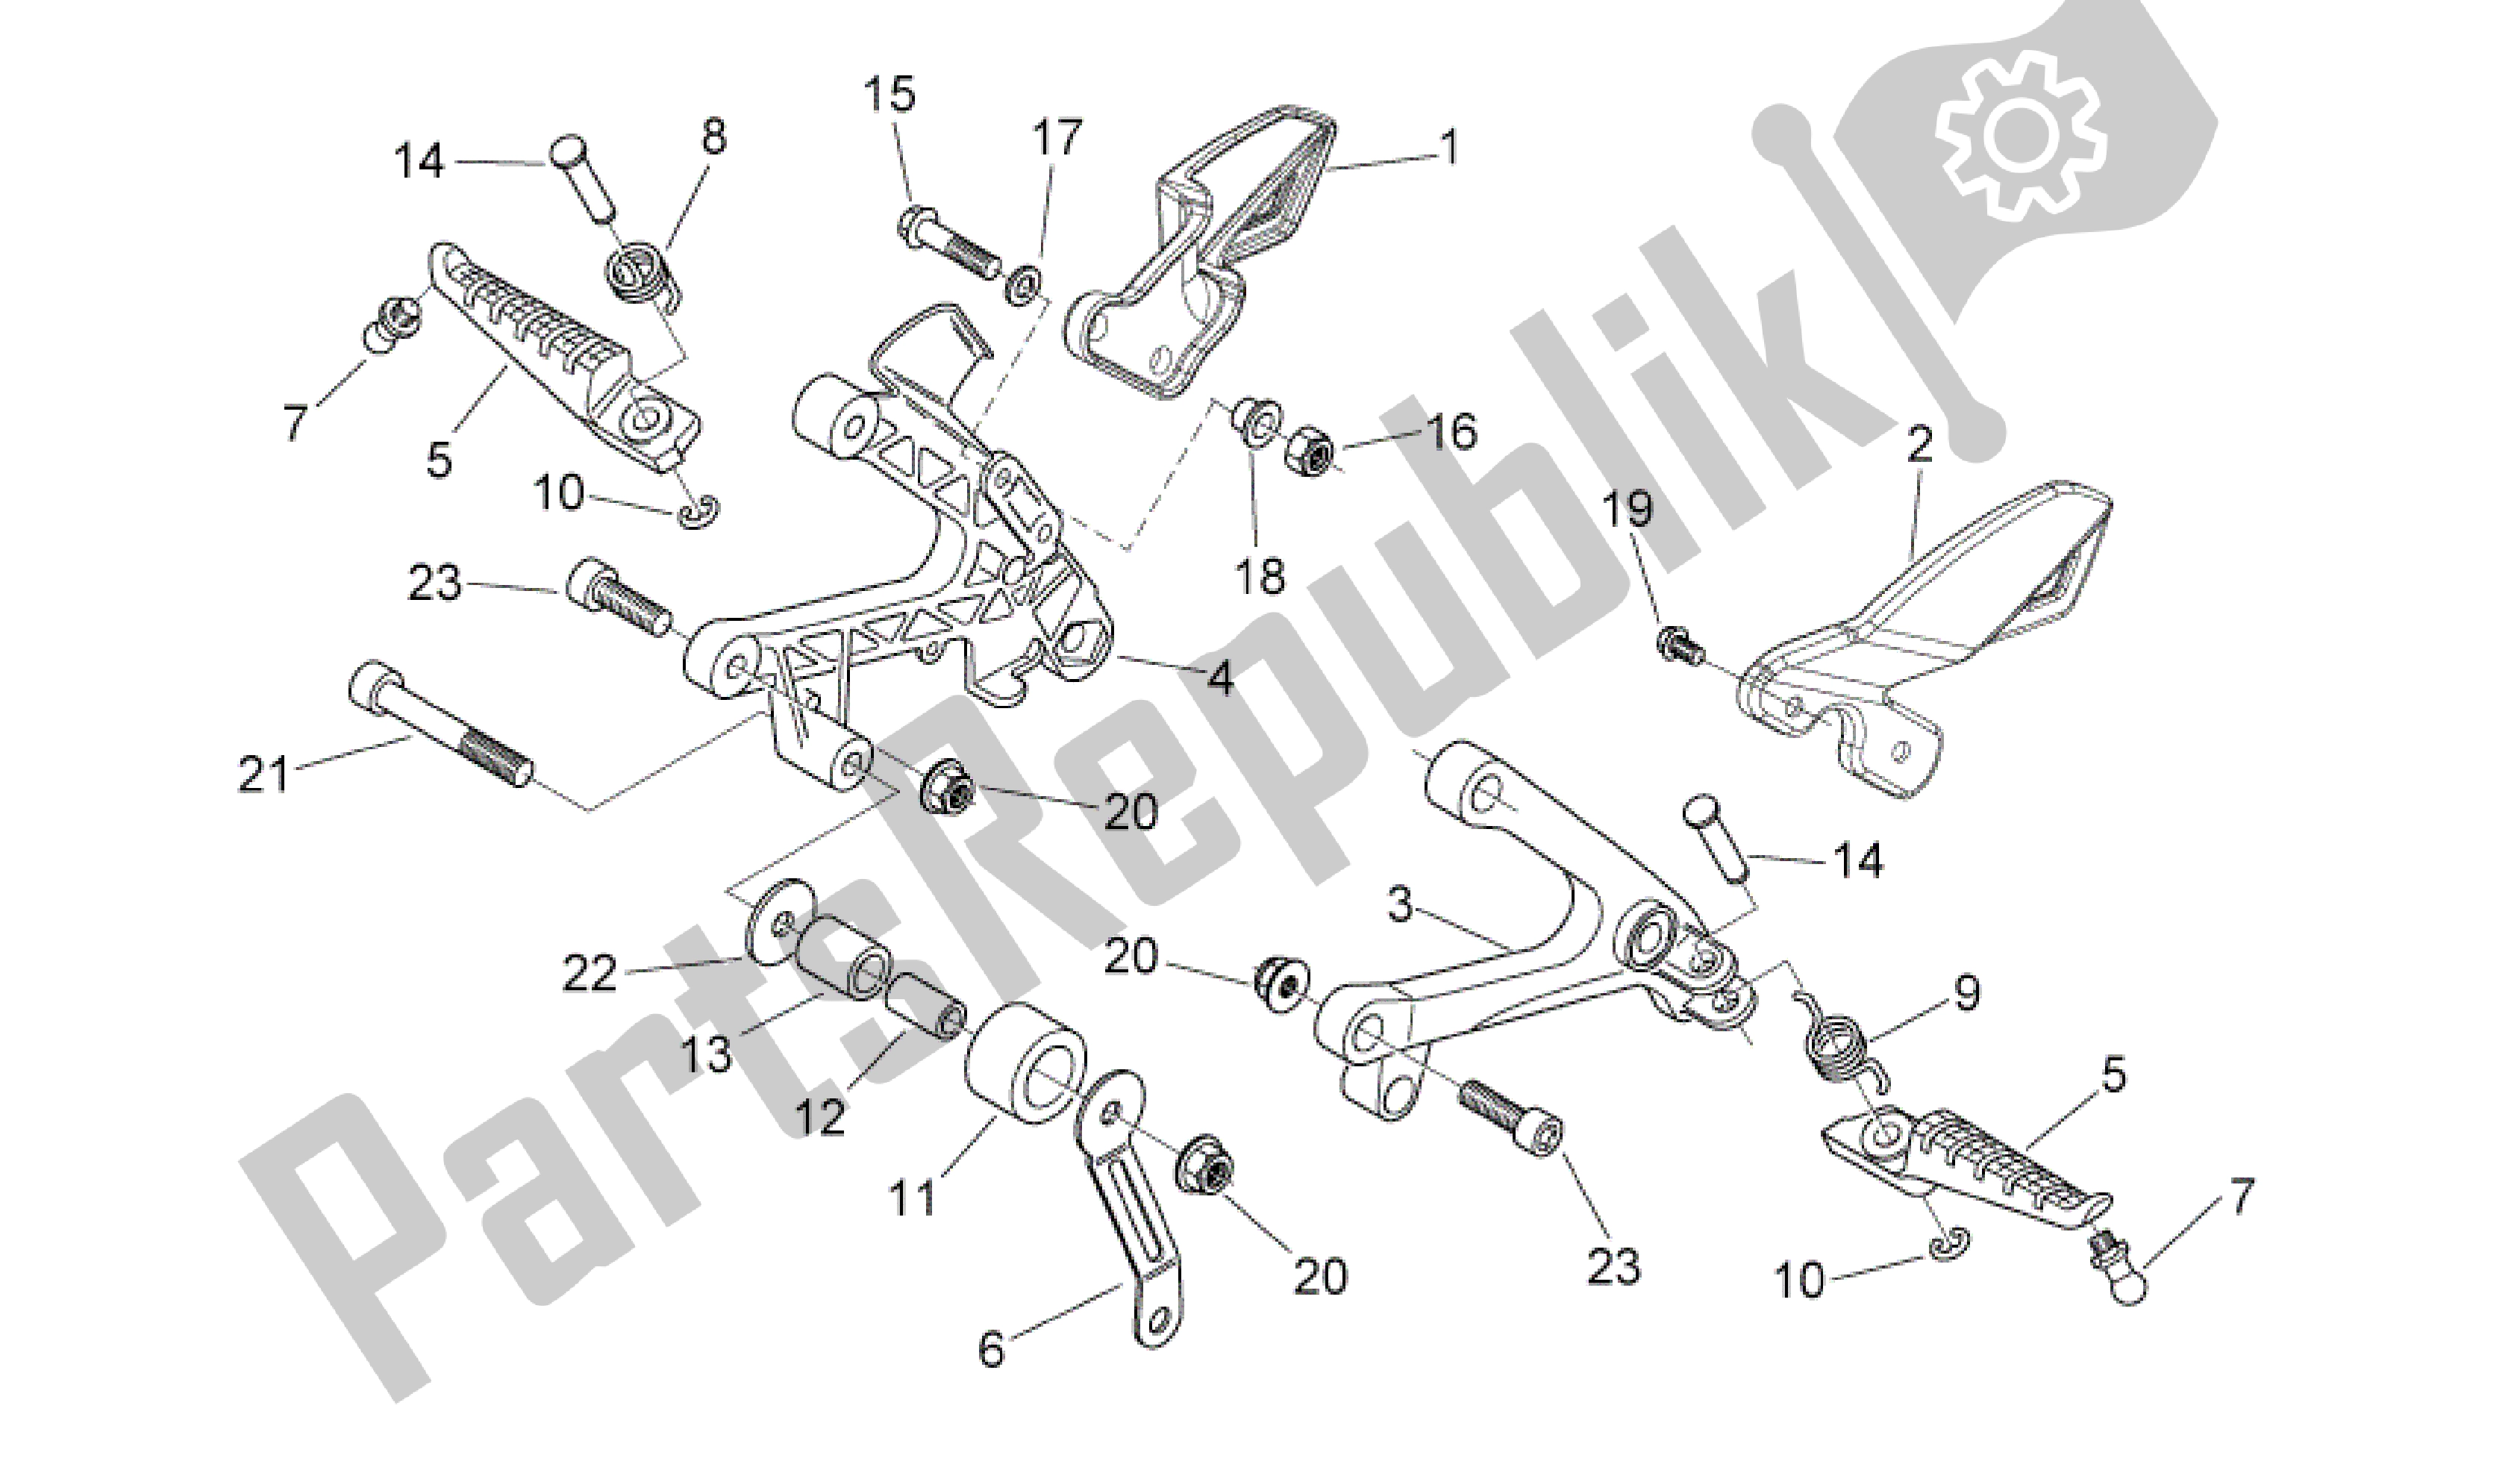 All parts for the Estribos Piloto of the Aprilia RS 125 2006 - 2010